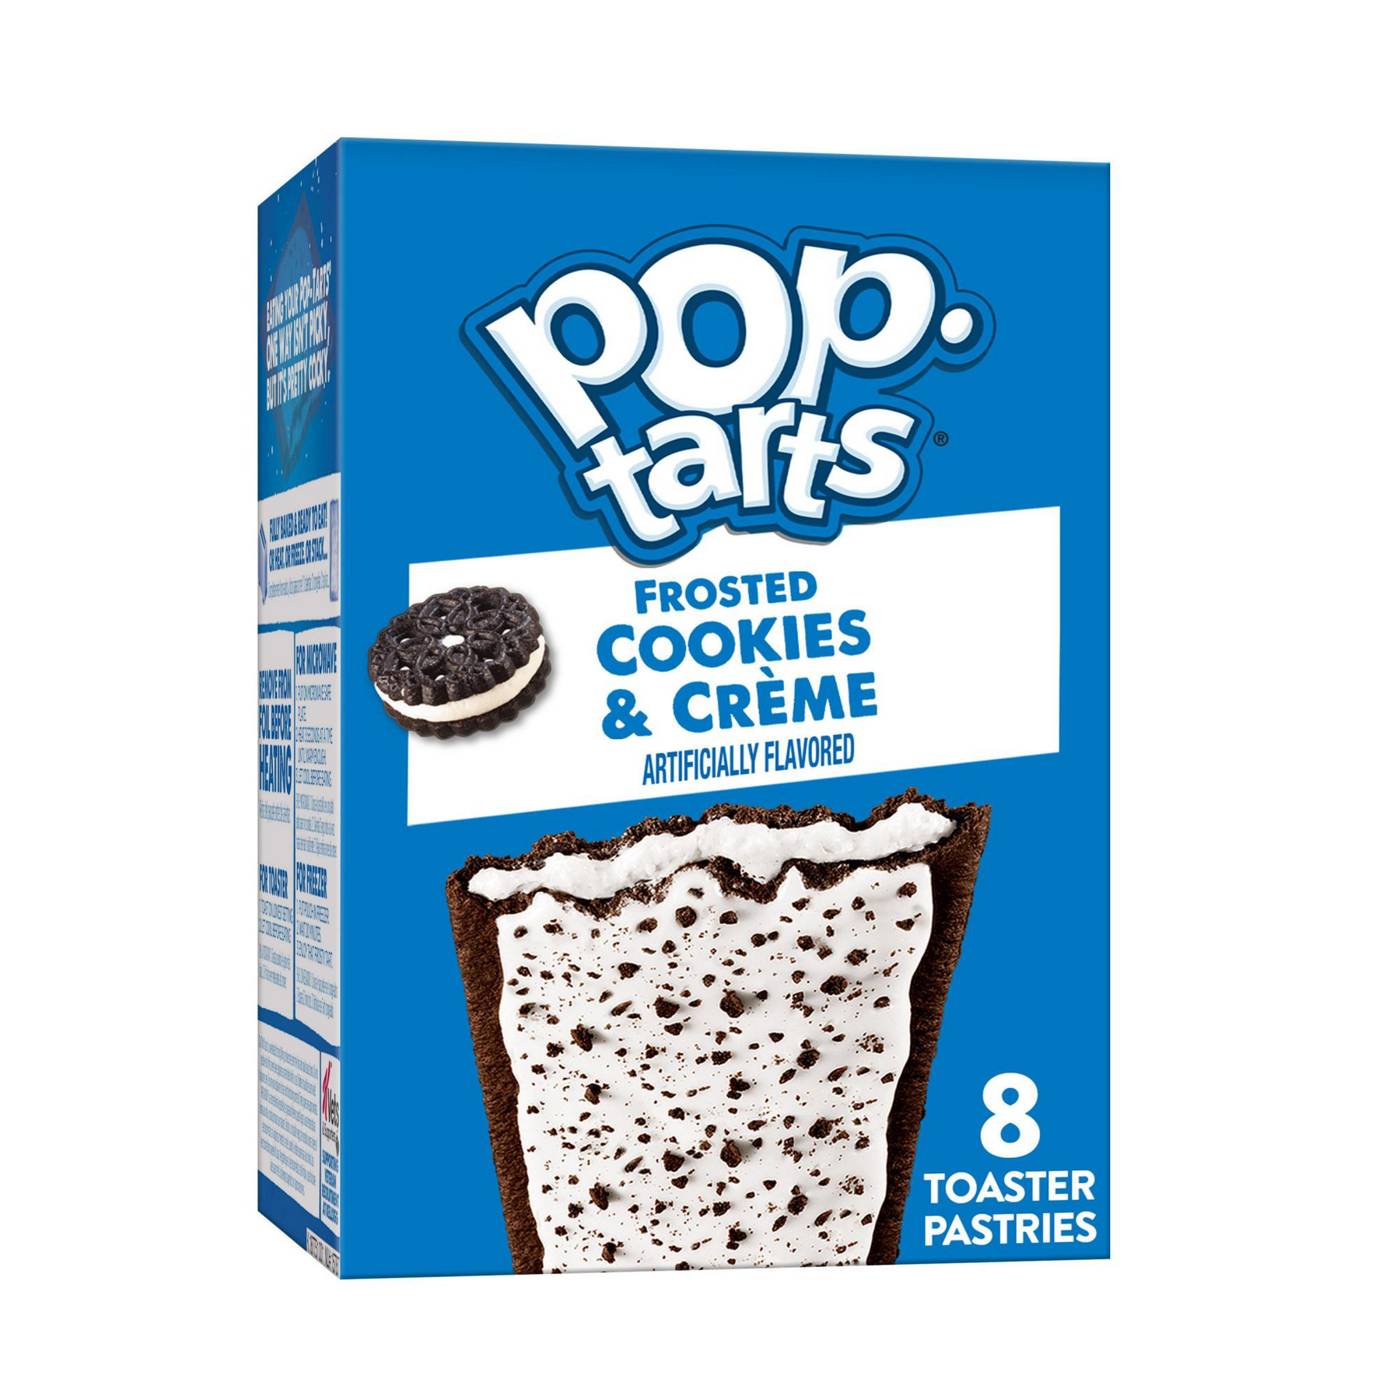 Pop-Tarts Frosted Cookies & Creme Toaster Pastries; image 1 of 9